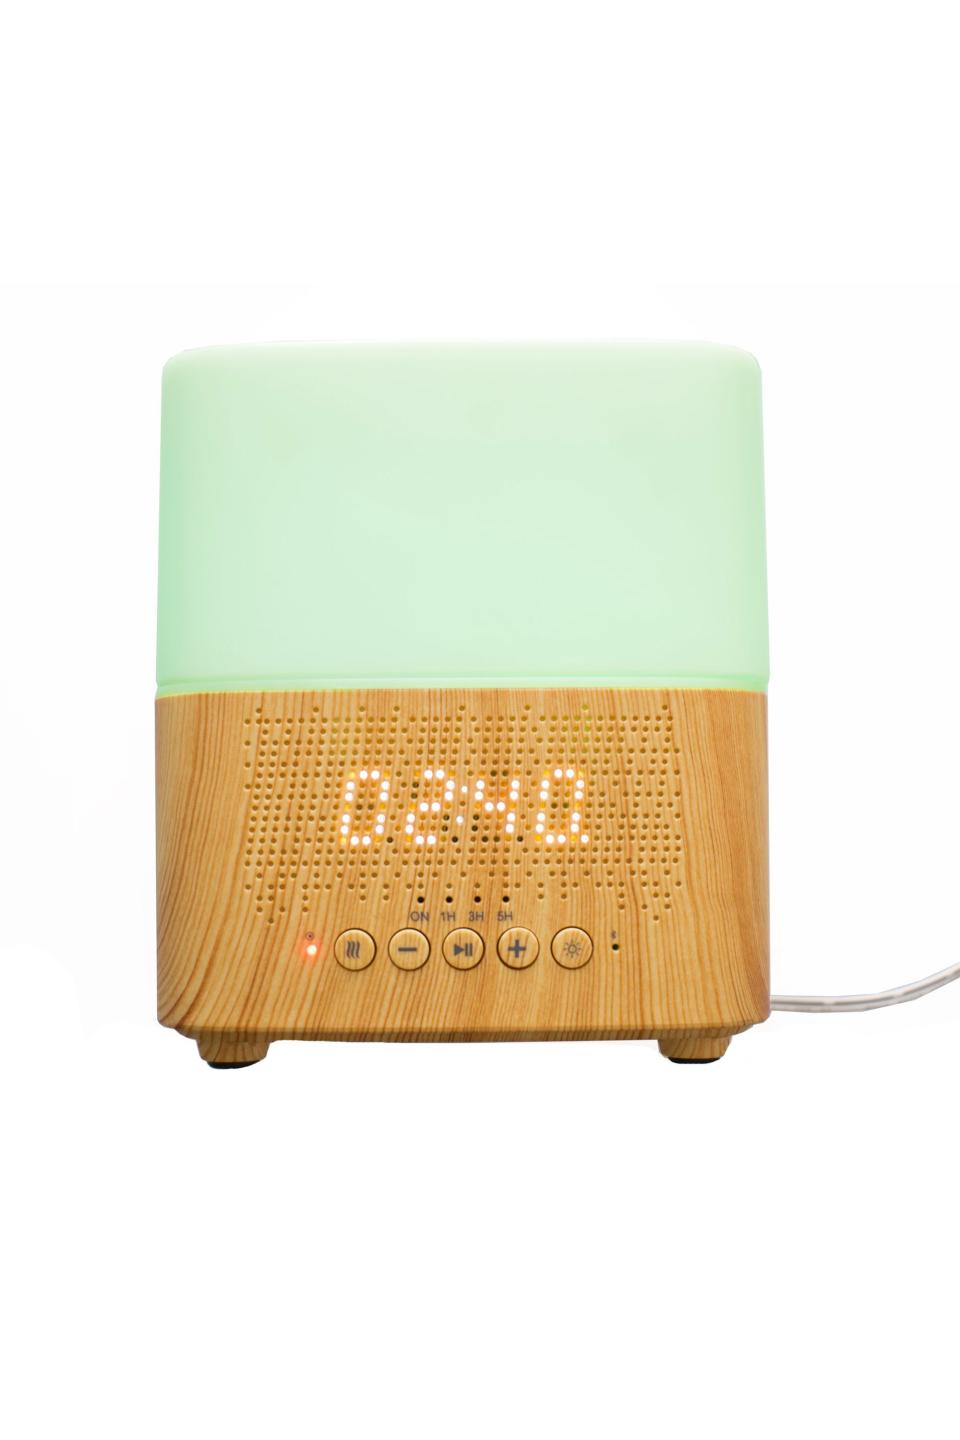 14) June & May  Diffuser With Built-In Speaker